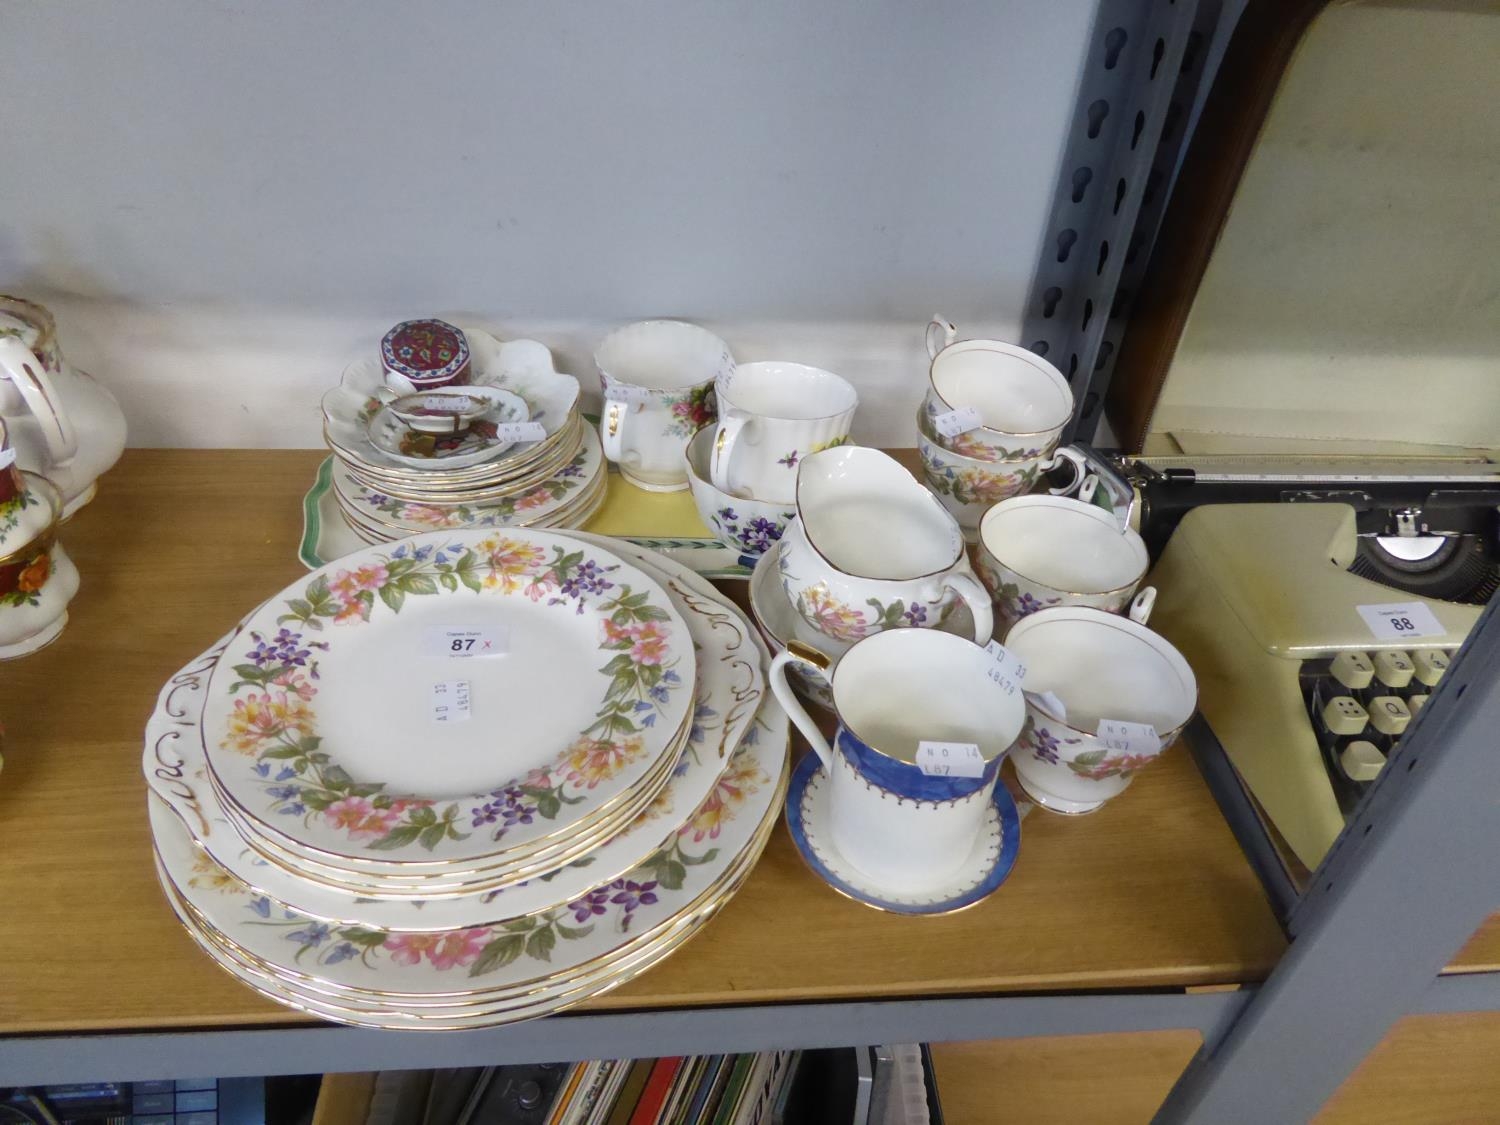 PARAGON CHINA ‘COUNTRY LANE’ PATTERN TEA AND DINNER SERVICE FOR FOUR PERSONS, APPROXIMATELY 23